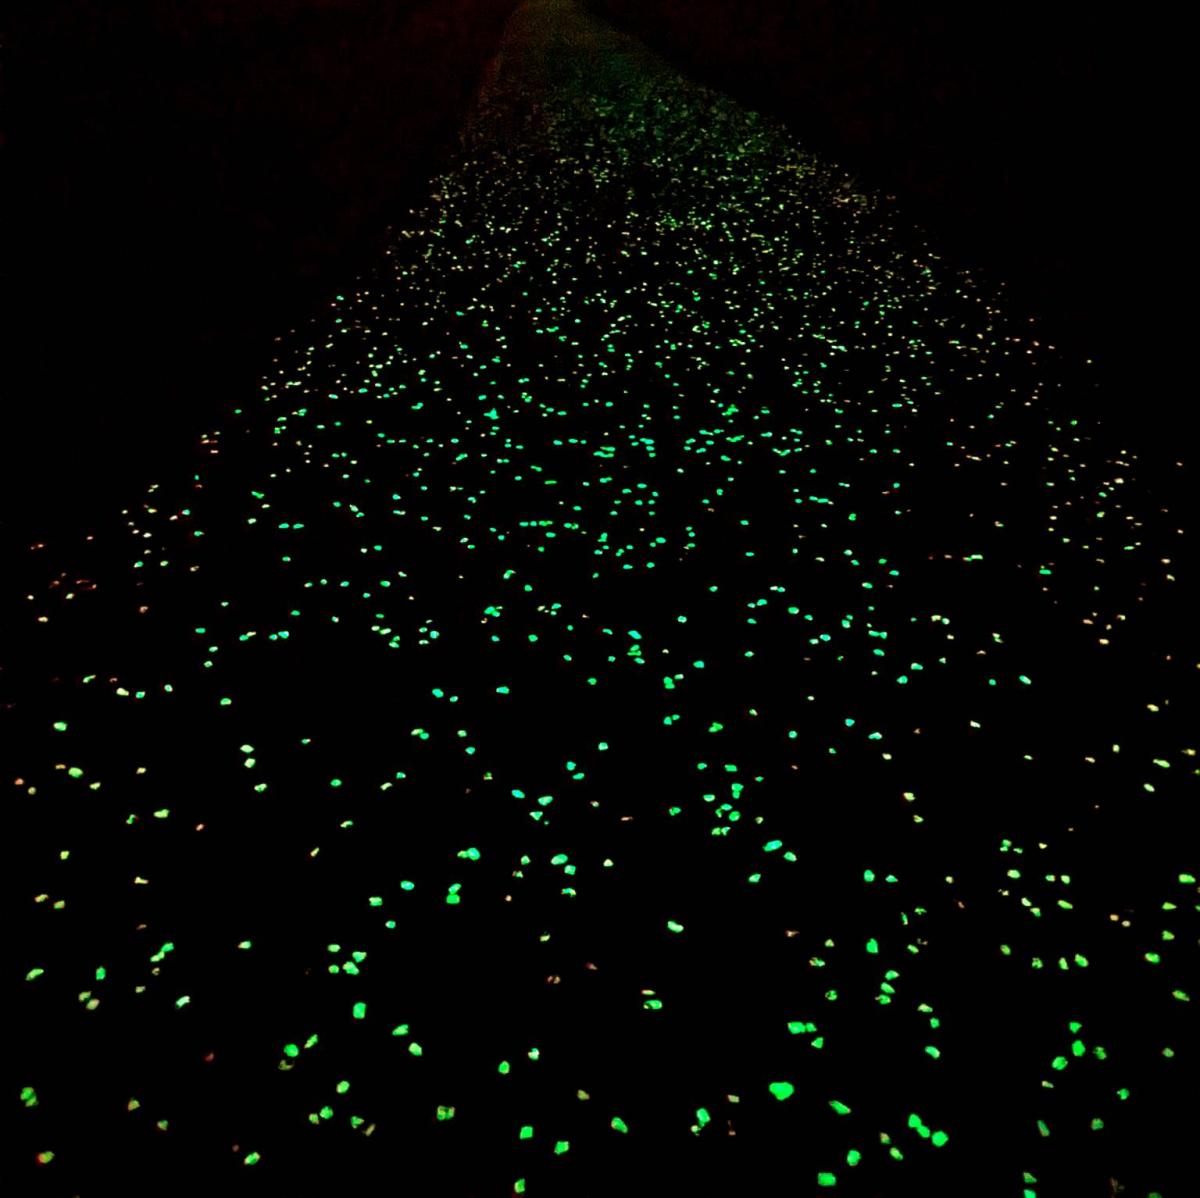 Nathan's Miles Glow Trail